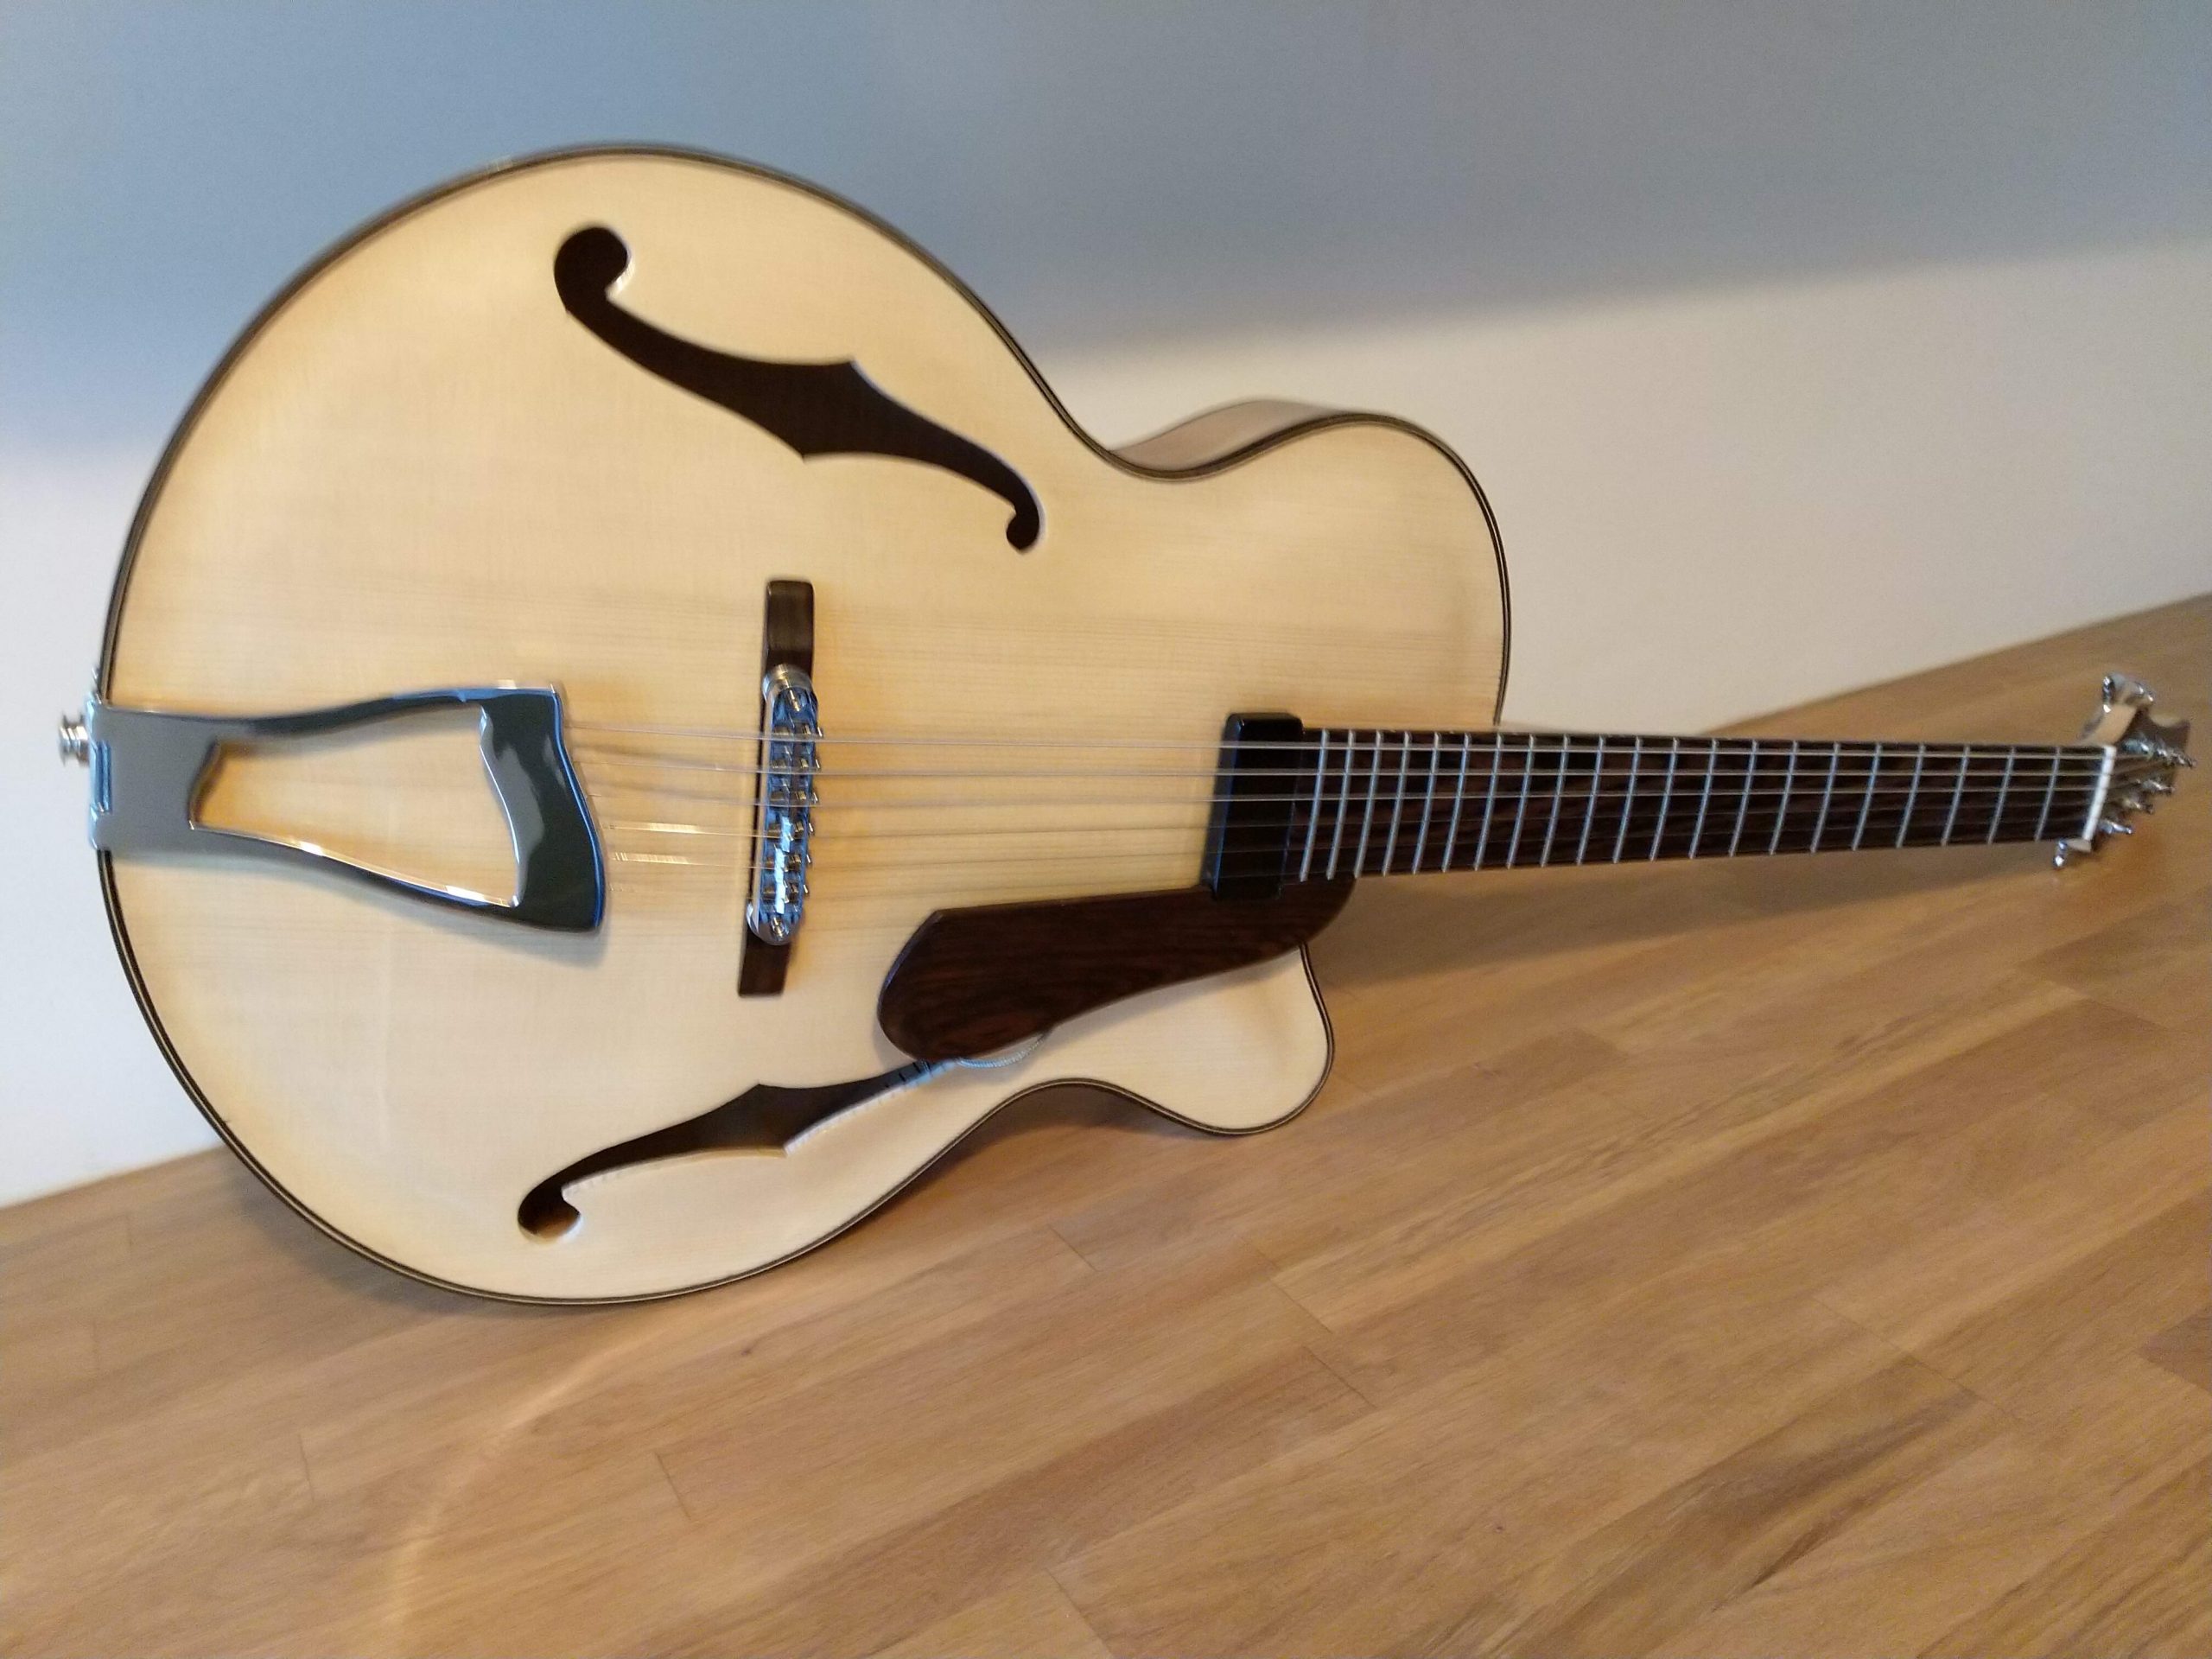 15" archtop